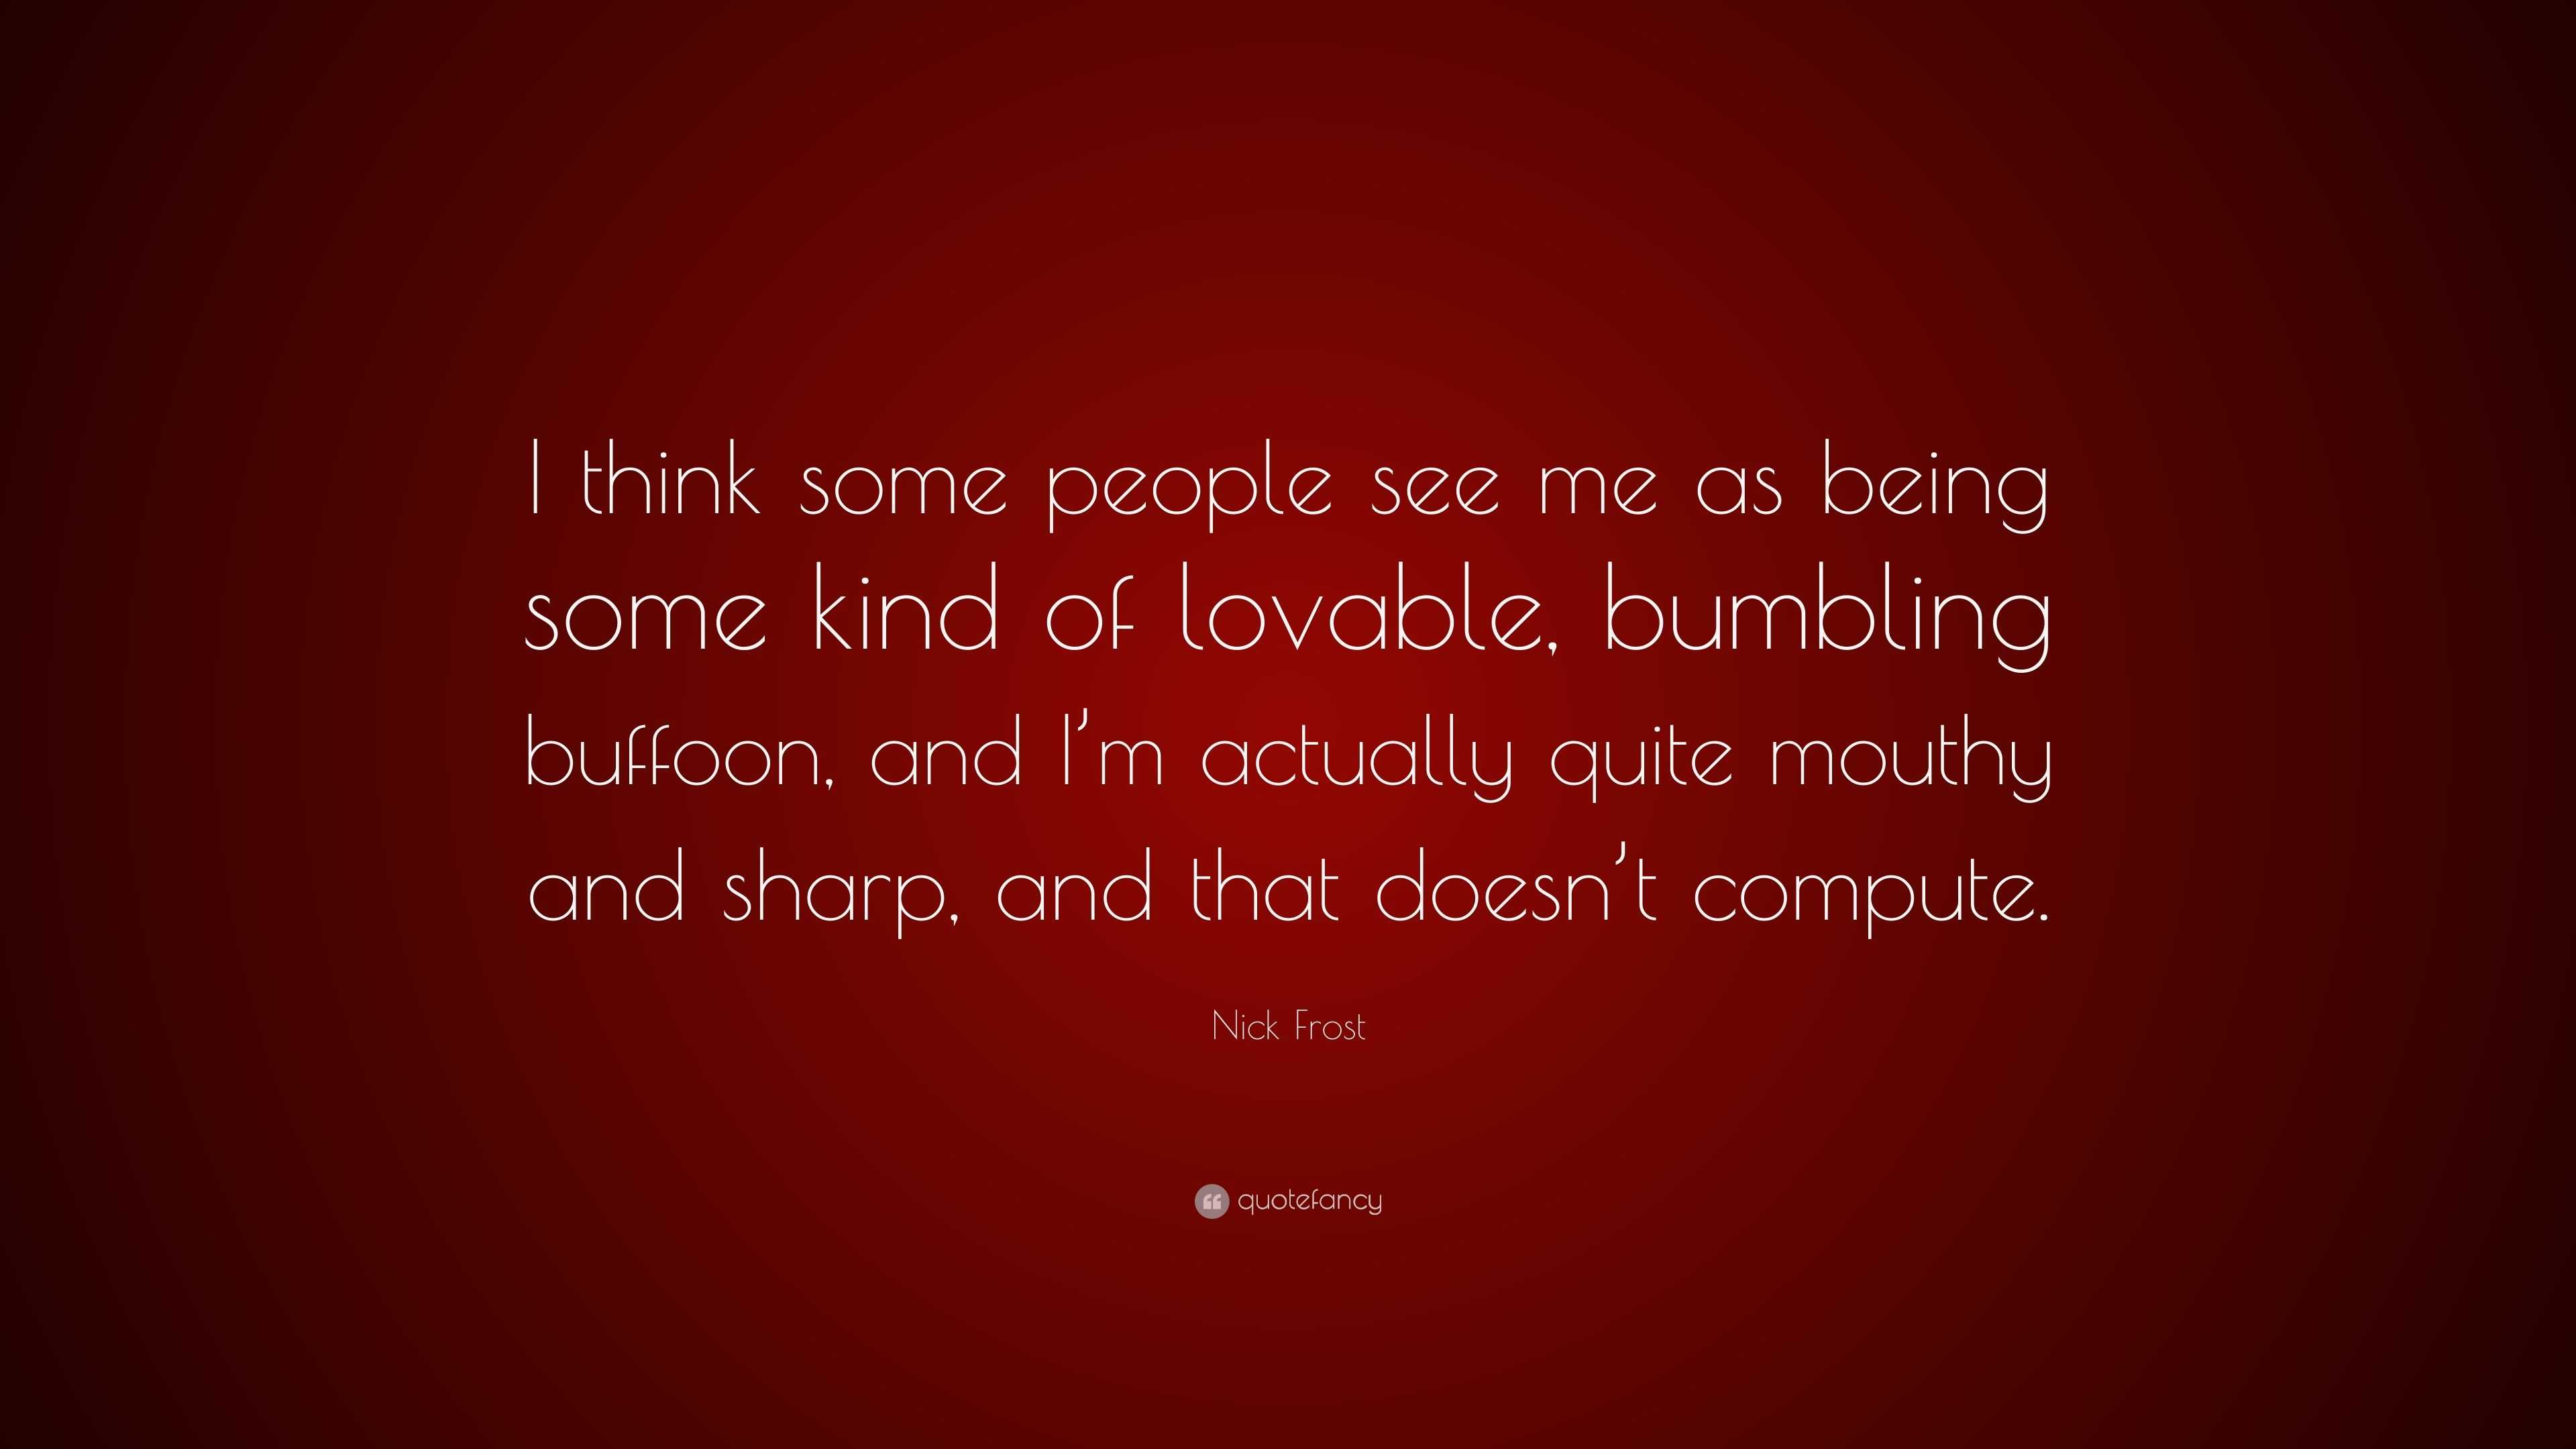 Nick Frost Quote: “I think some people see me as being some kind of ...